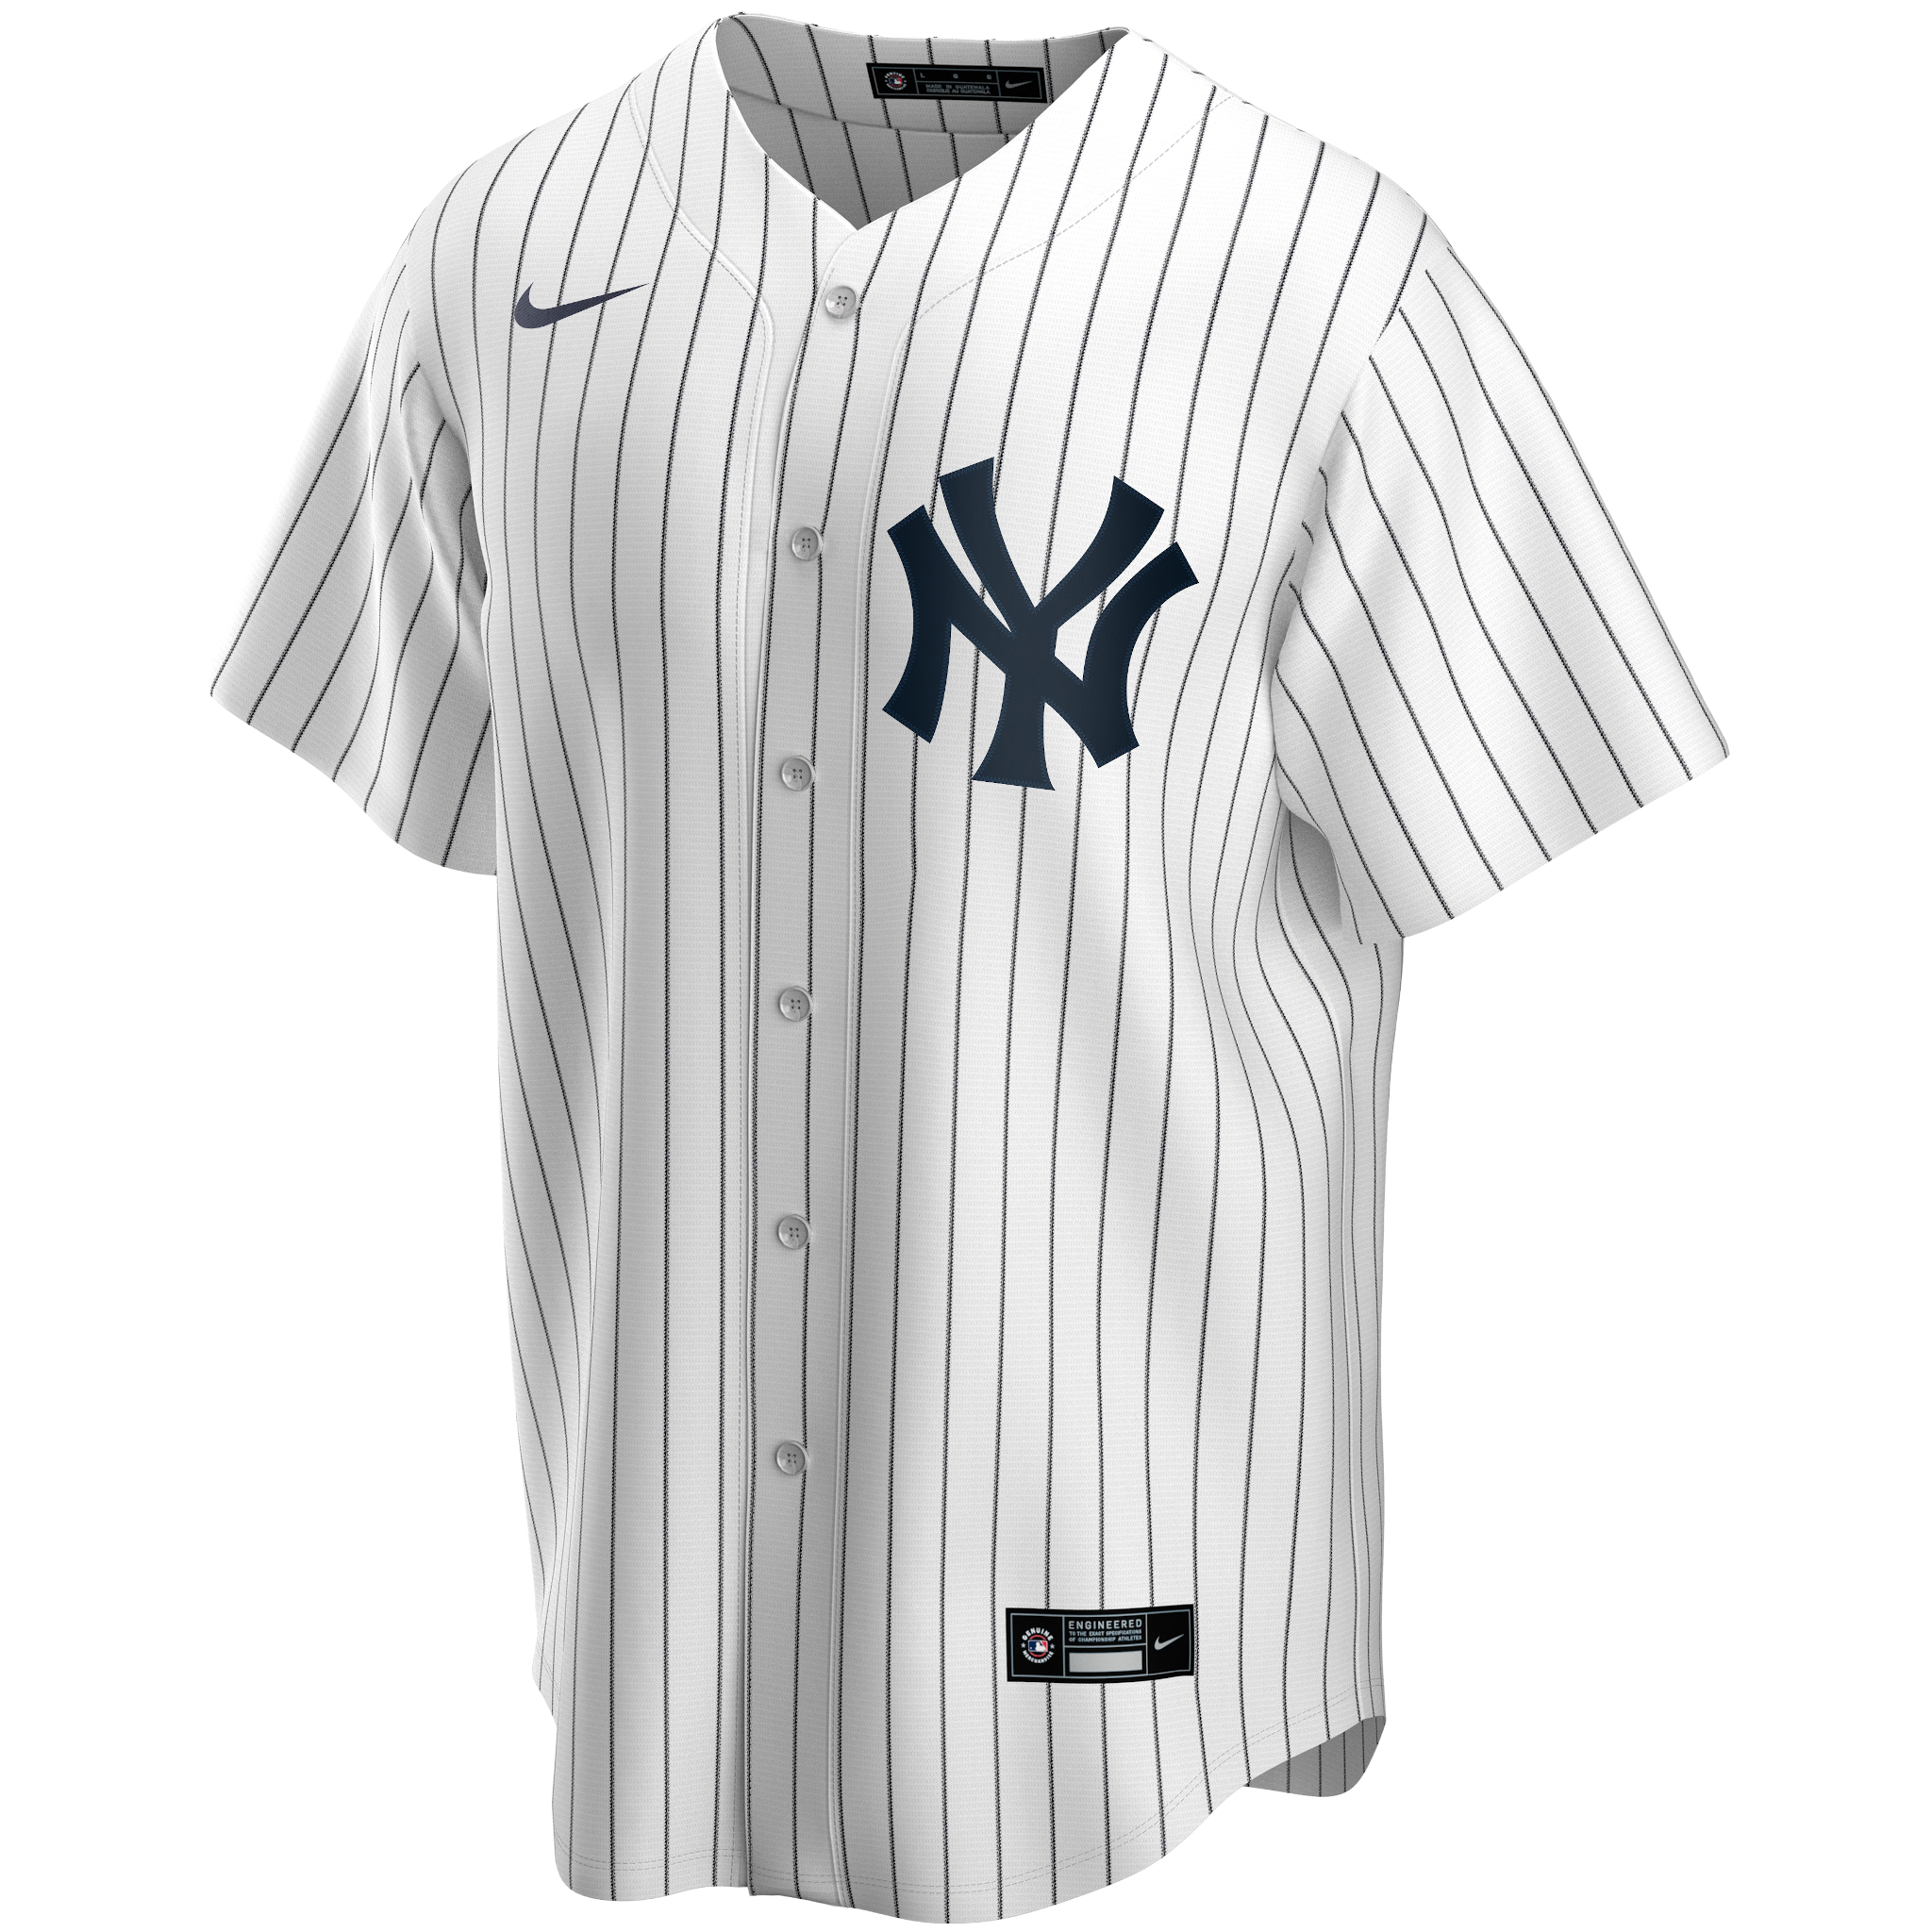 Mickey Mantle Yankees jersey from 1958 sells for record-shattering $4.68  million 